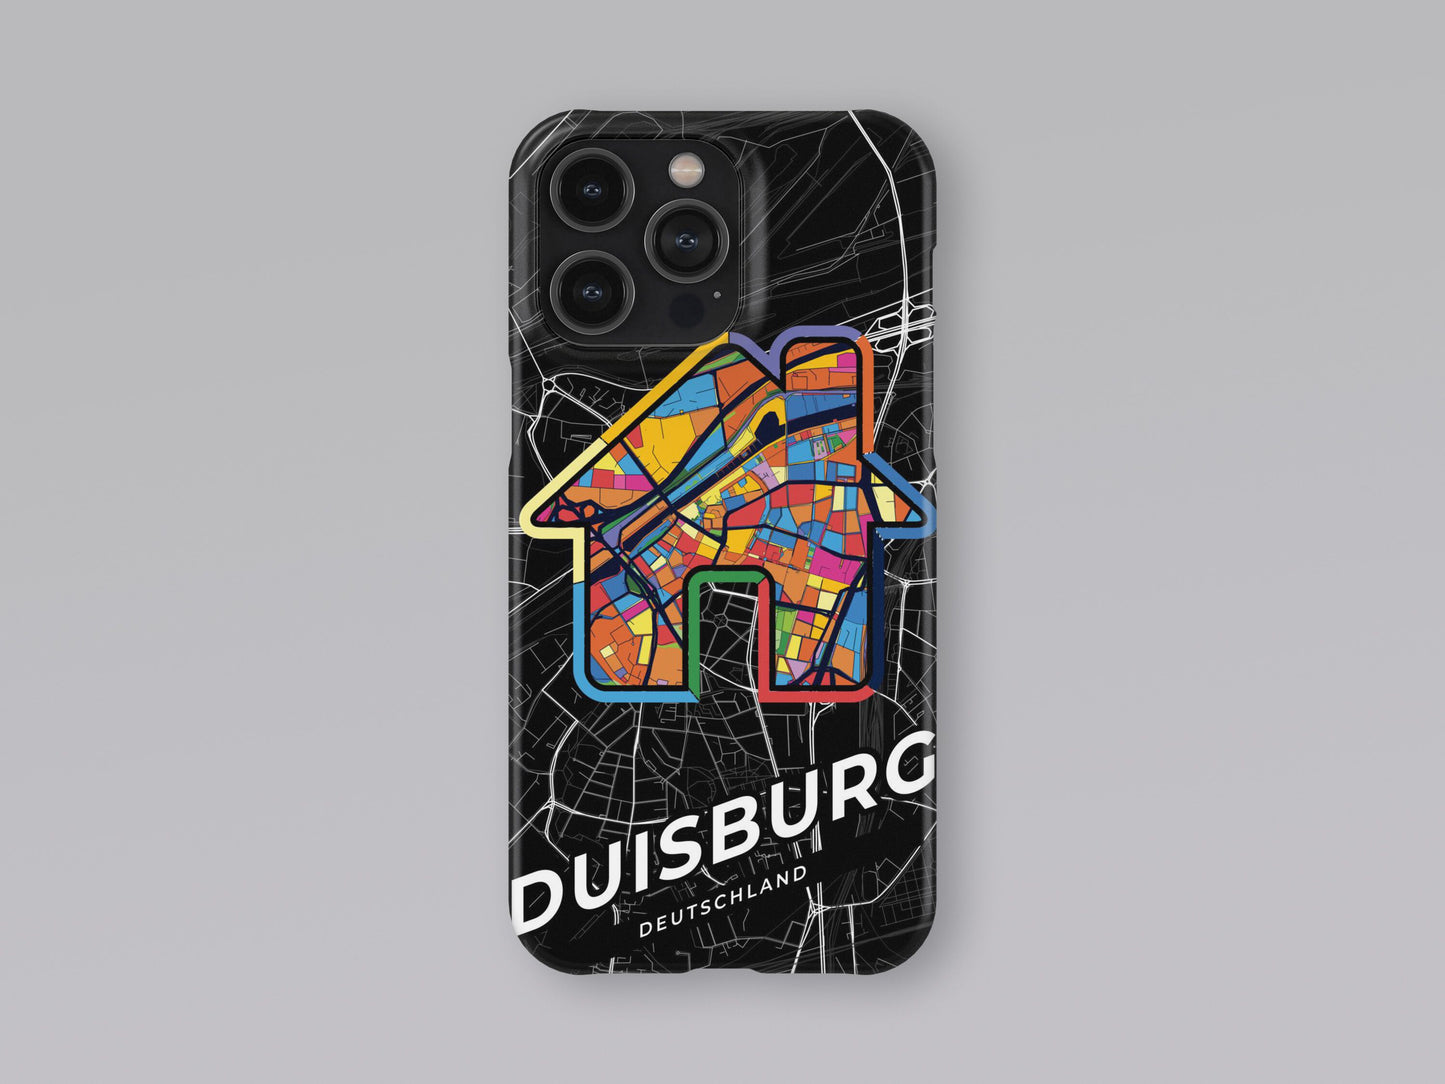 Duisburg Deutschland slim phone case with colorful icon. Birthday, wedding or housewarming gift. Couple match cases. 3